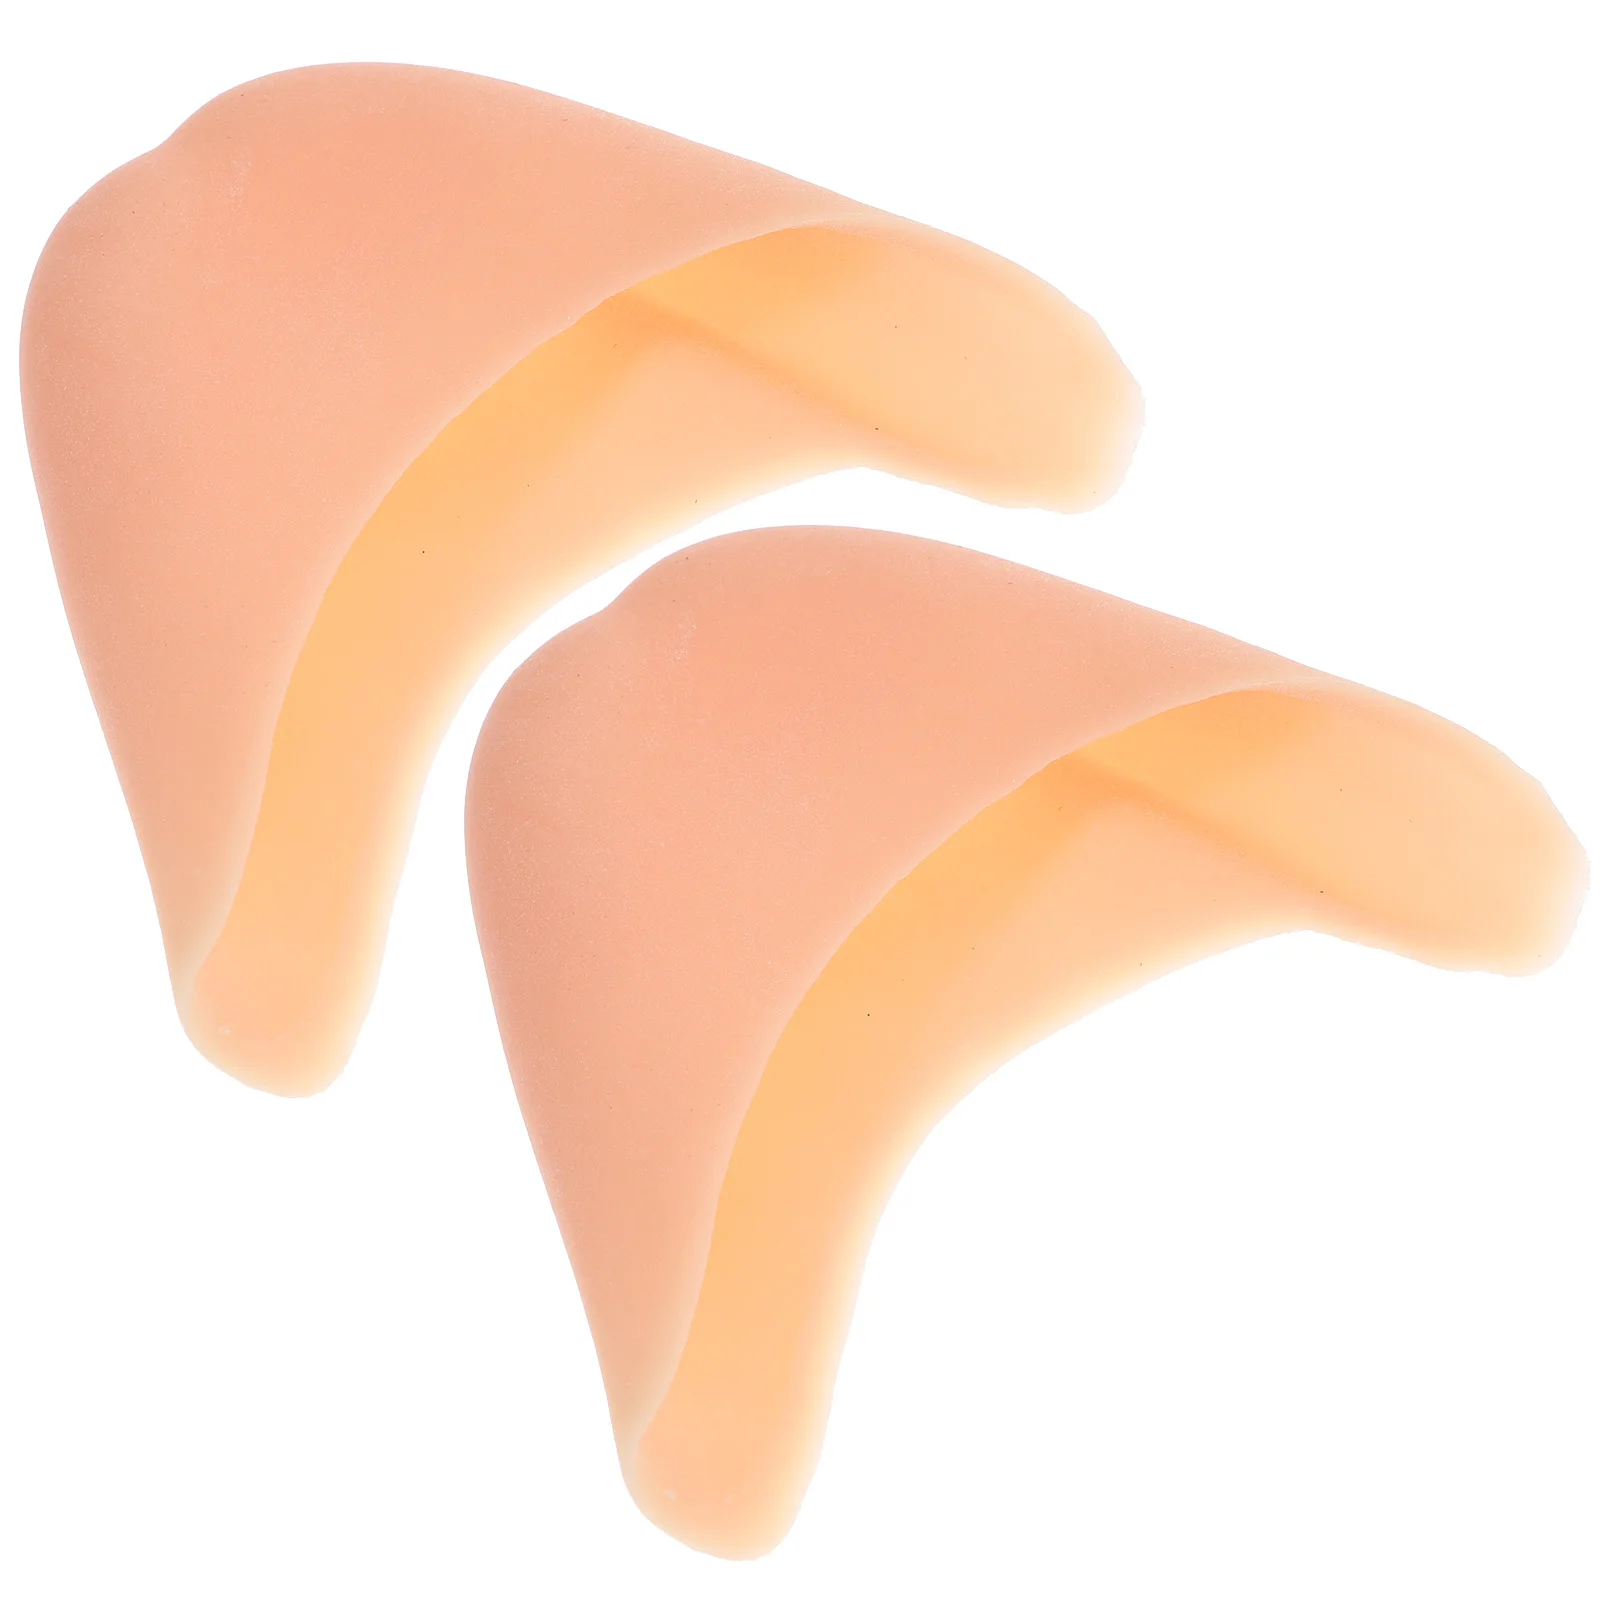 

1 Pair of Ballet Pointe Shoe Insoles Pads Silicone Shoe Insoles Pads Sleeves Topper Cover Protection Cushion for of Metatarsal (